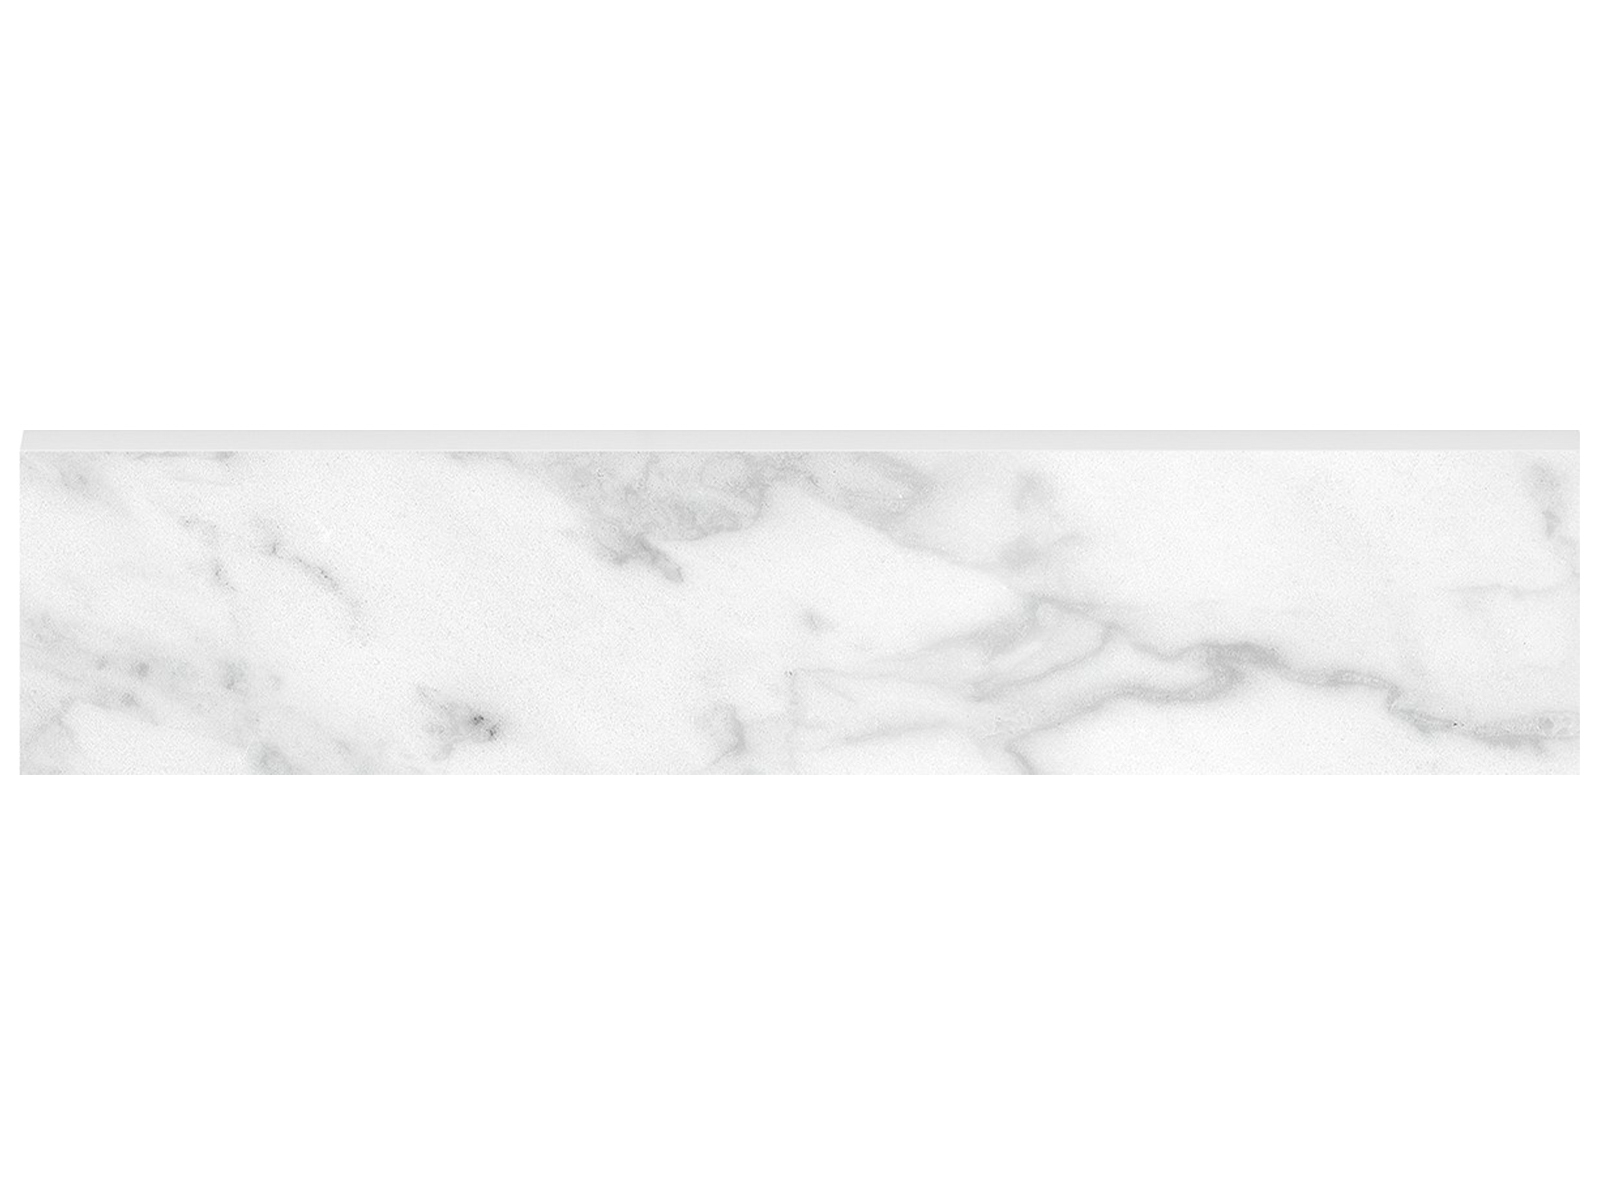 carrara abisso pattern glazed porcelain bullnose molding from plata anatolia collection distributed by surface group international matte finish straight edge edge 3x12 bar shape